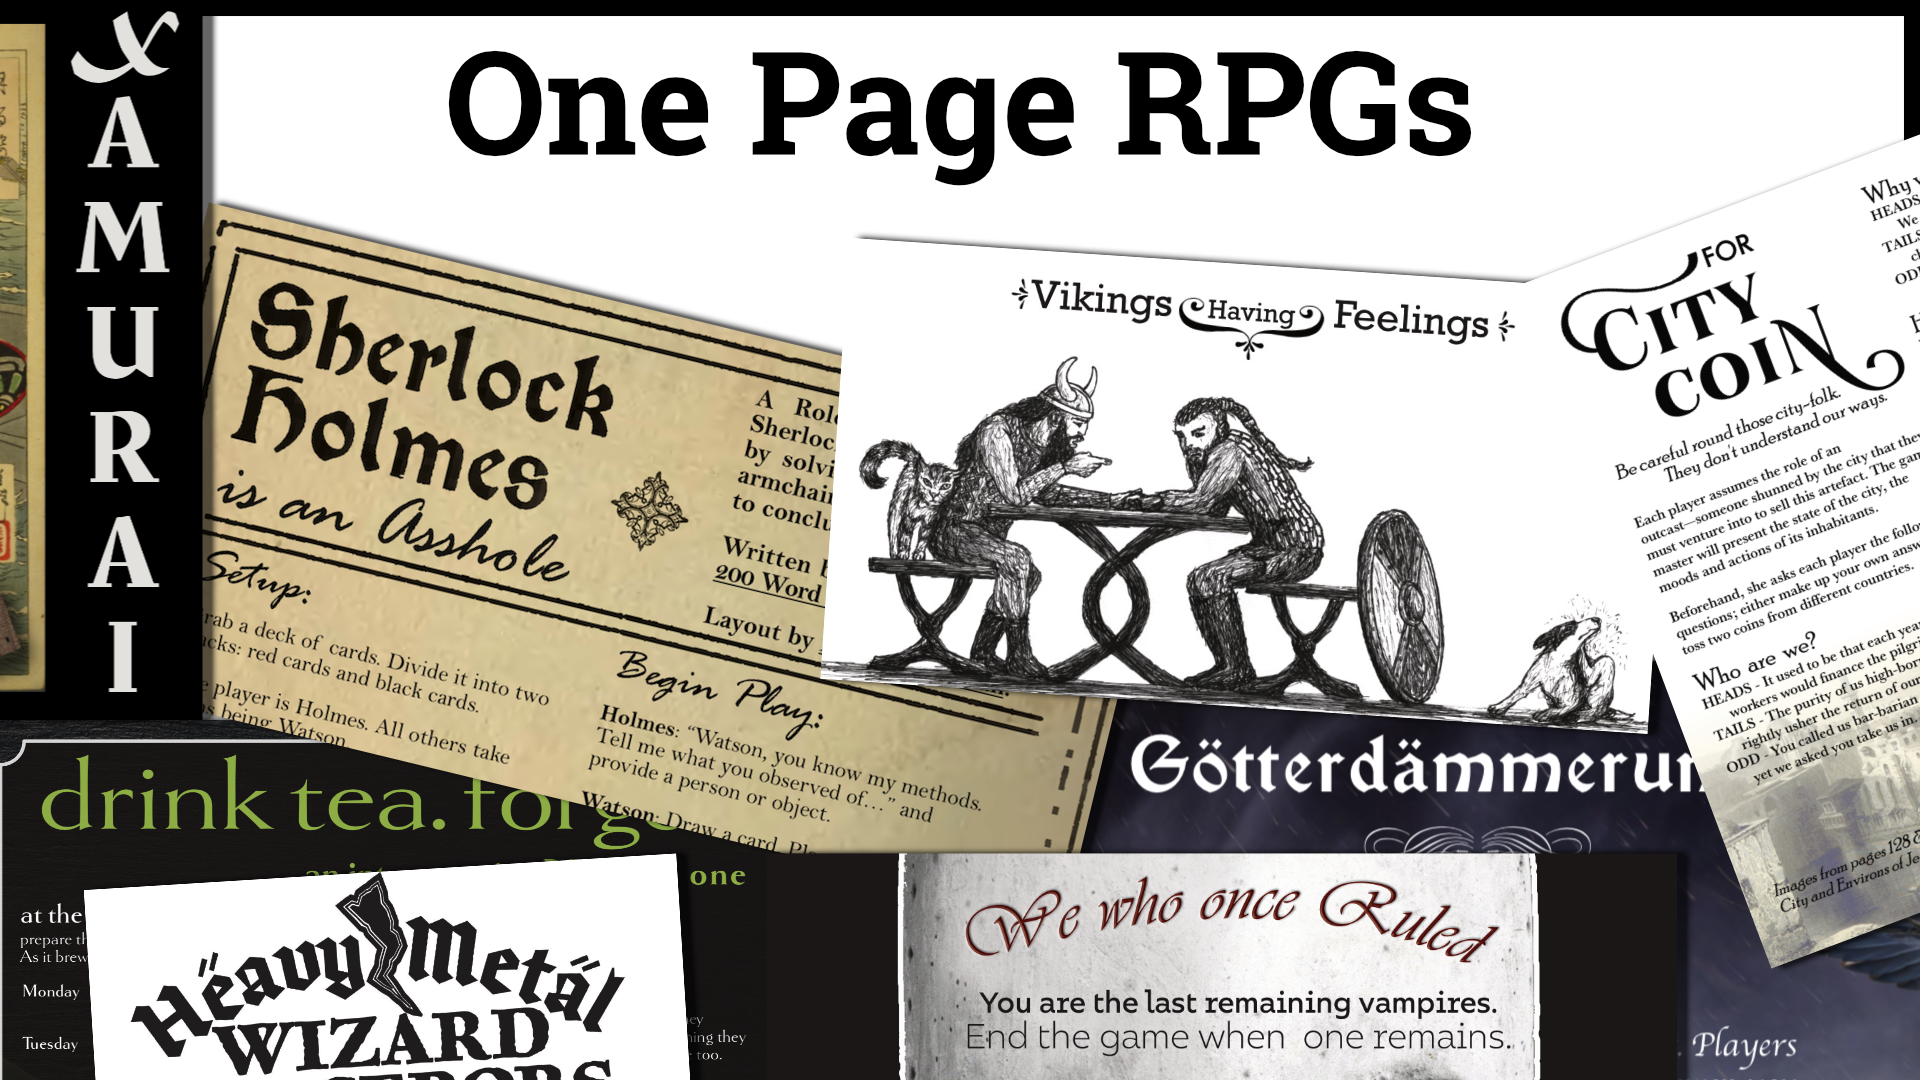 One Page RPGs